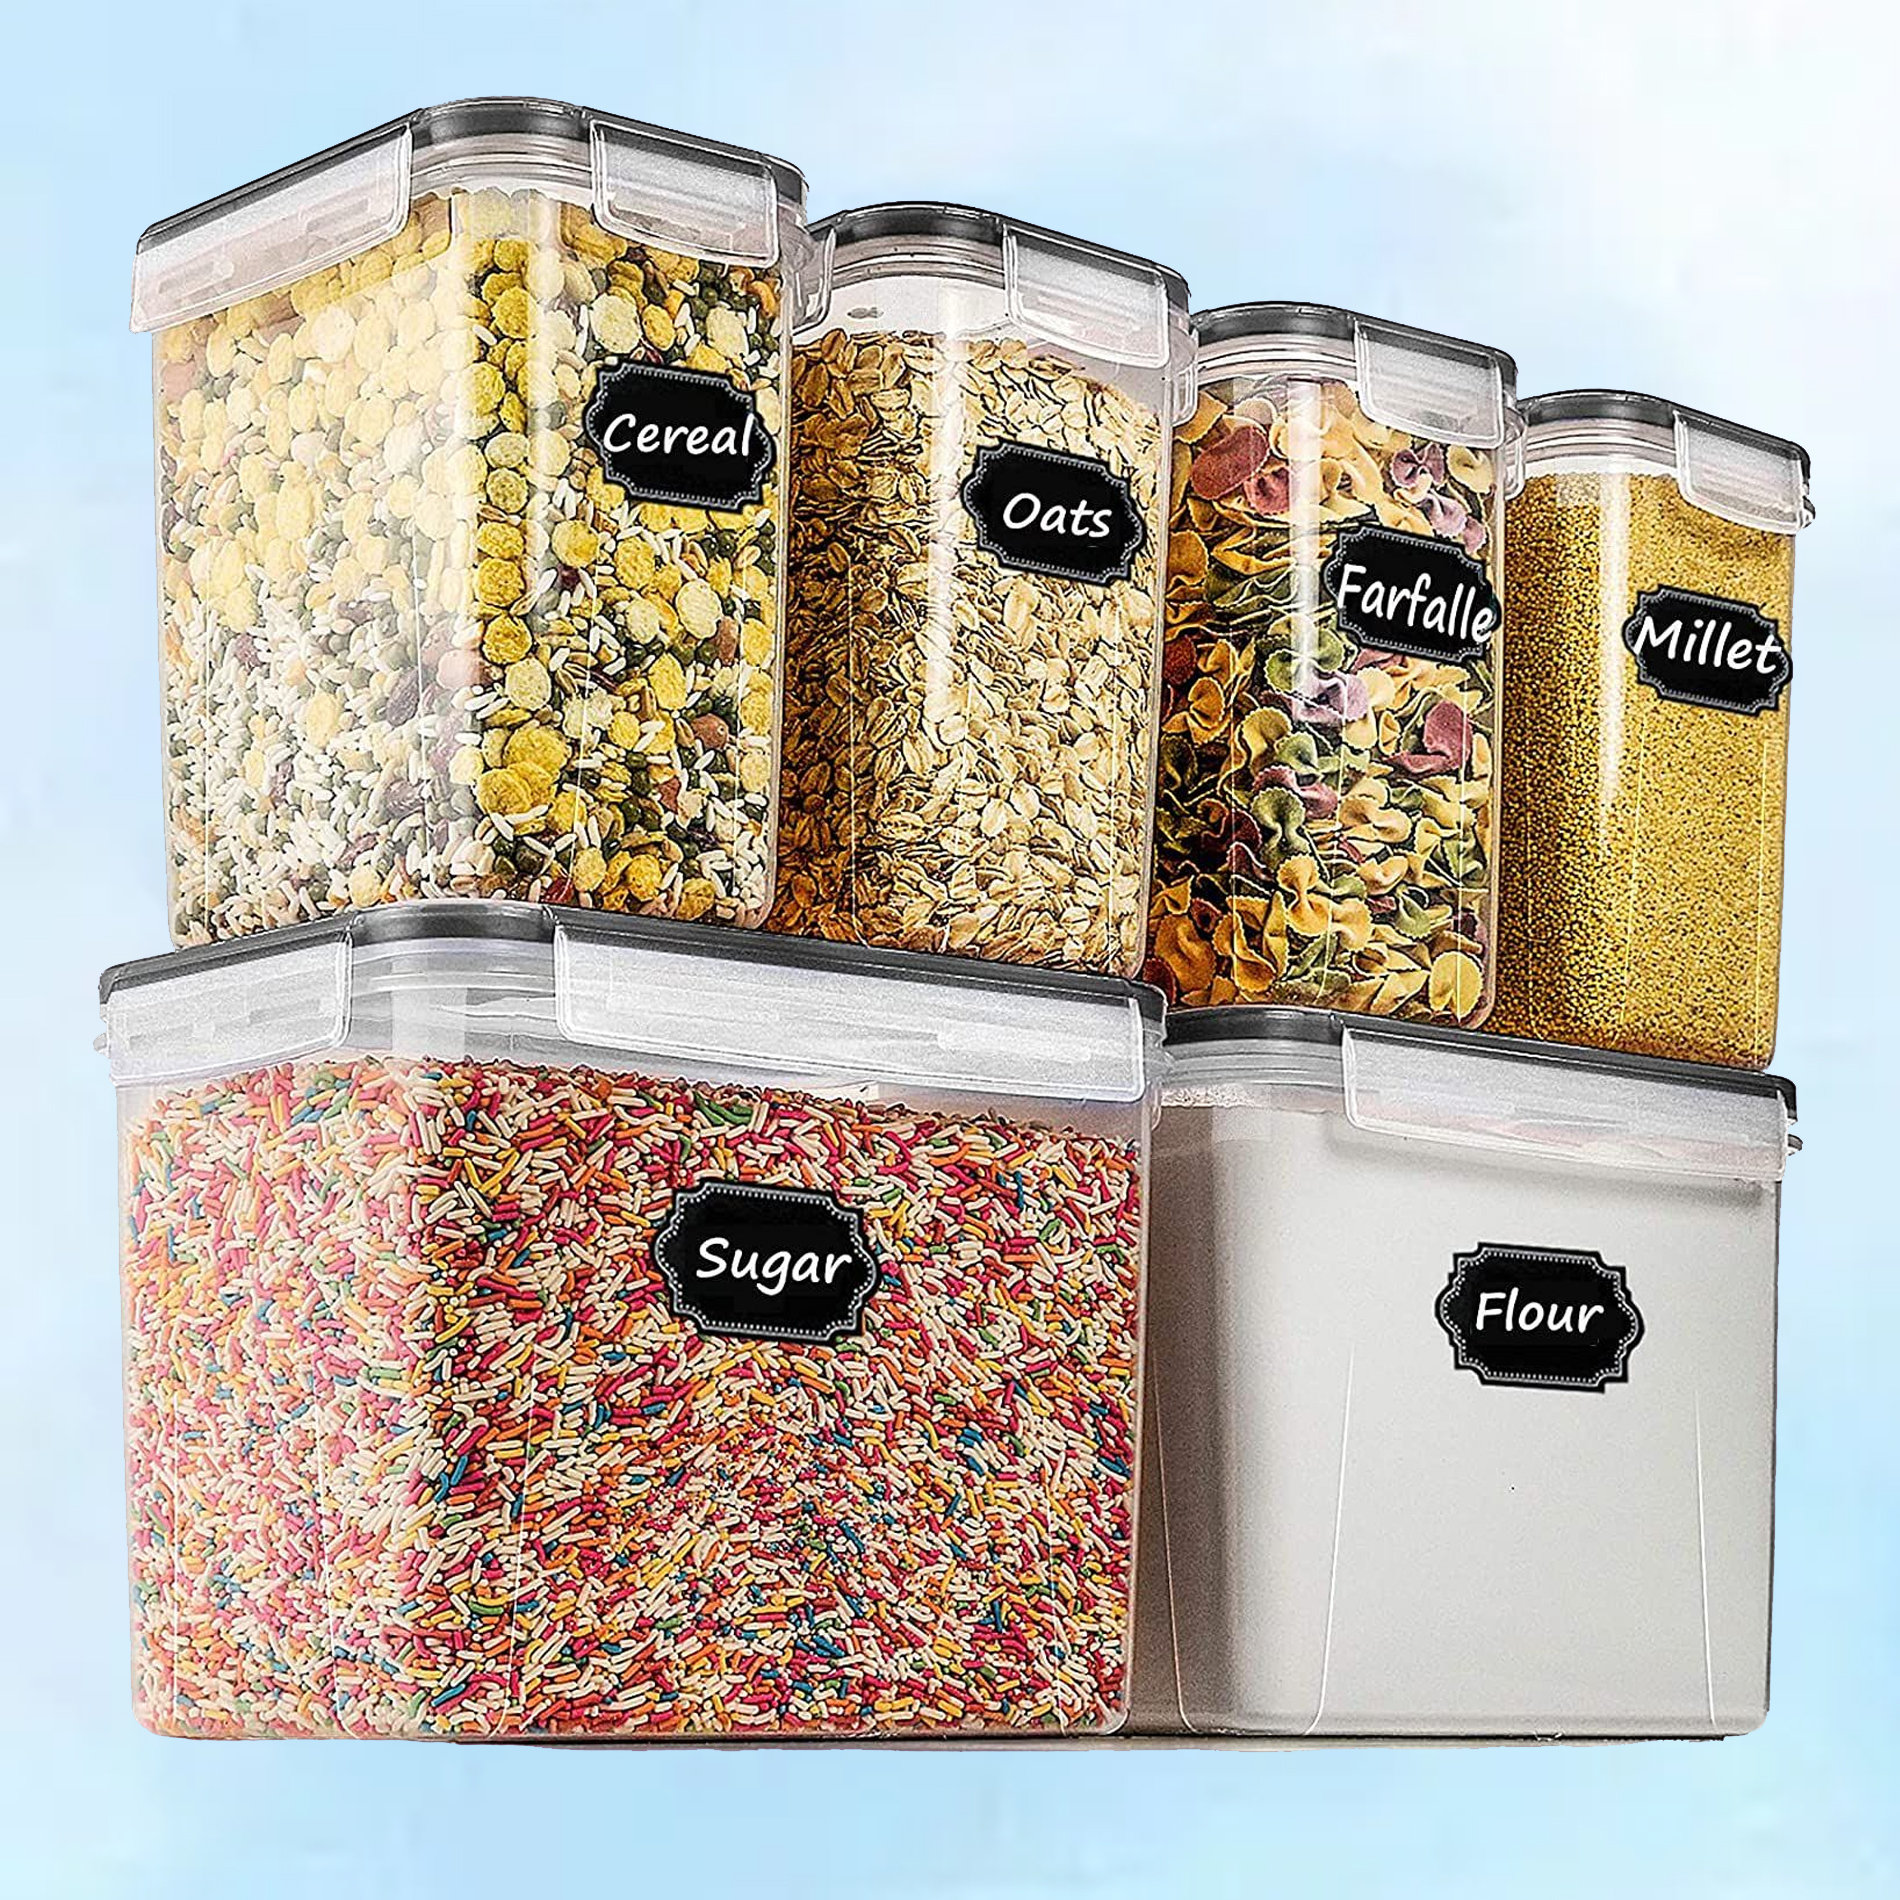 6 PACK Large Cereal &Dry Food Storage Containers Airtight Cereal  Organization